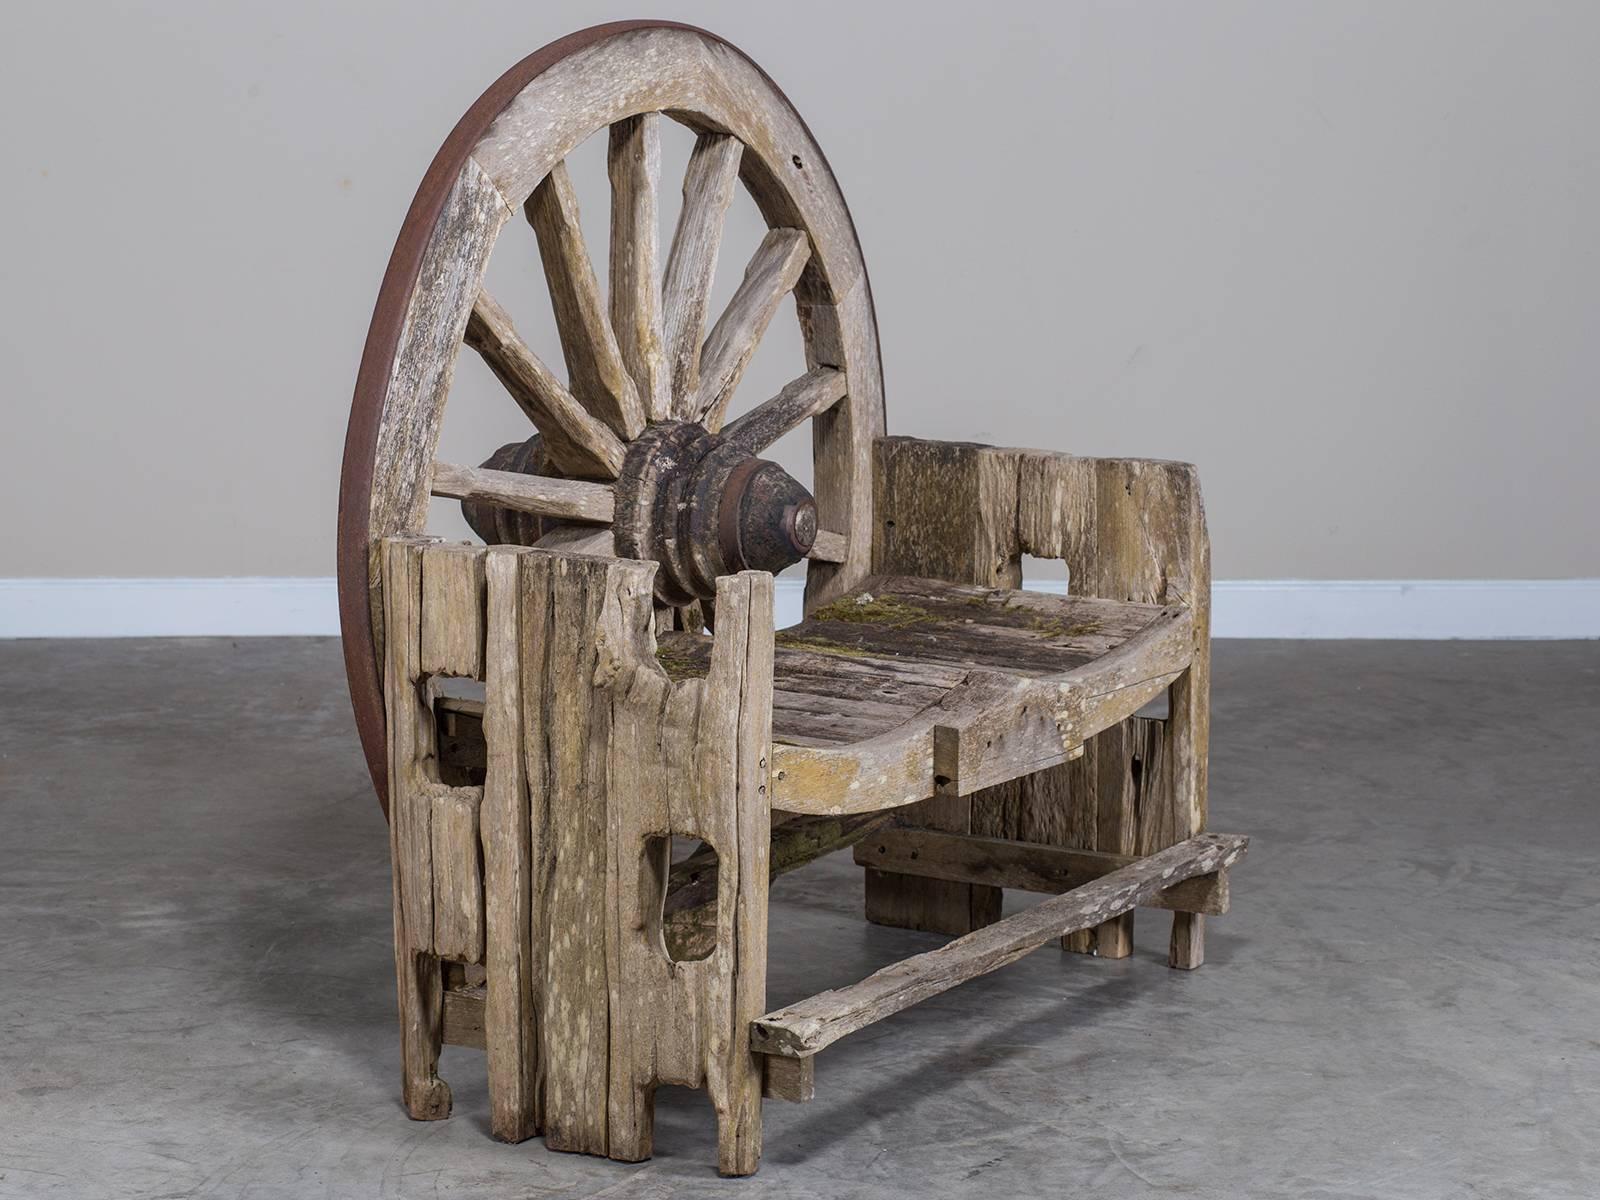 Receive our new selections direct from 1stdibs by email each week. Please click on “Follow Dealer” button below and see them first!

This quirky garden bench was originally in the French region of the Tarn where its distinctive wagon wheel back